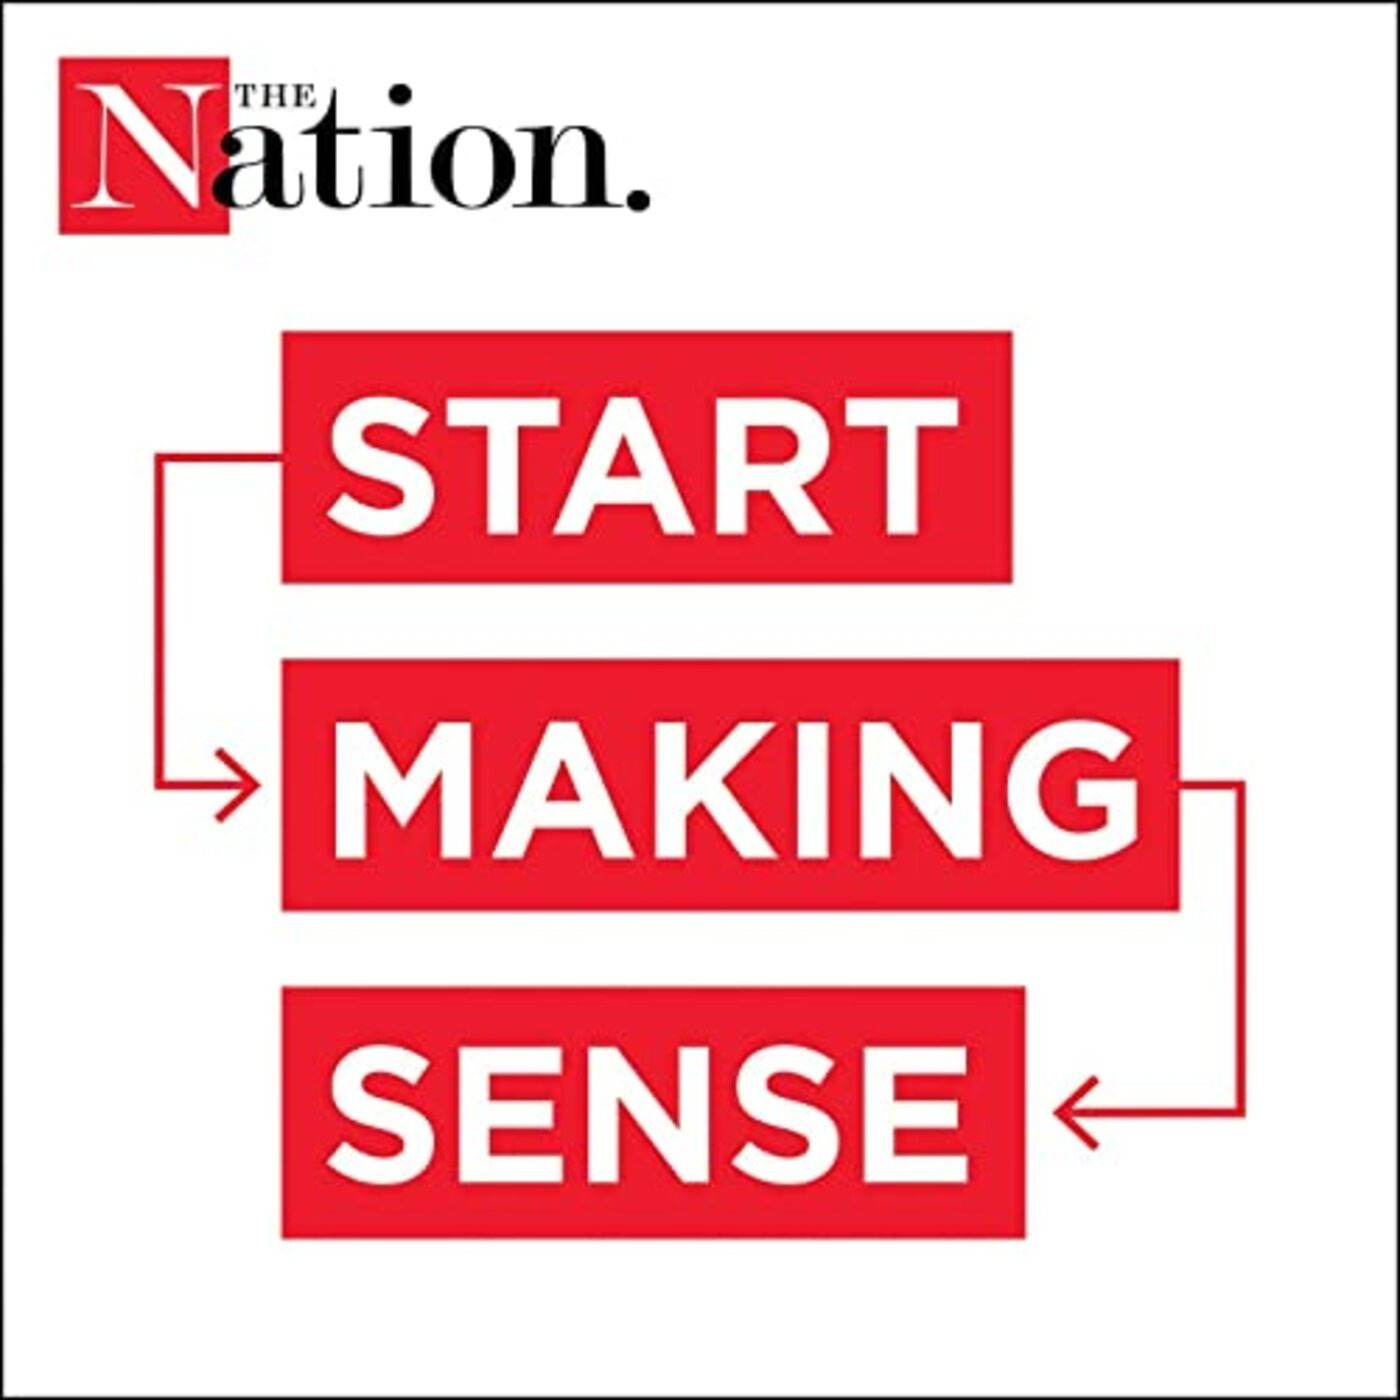 Start Making Sense: Is Planned Parenthood Too Cautious? Plus: Writing and Politics